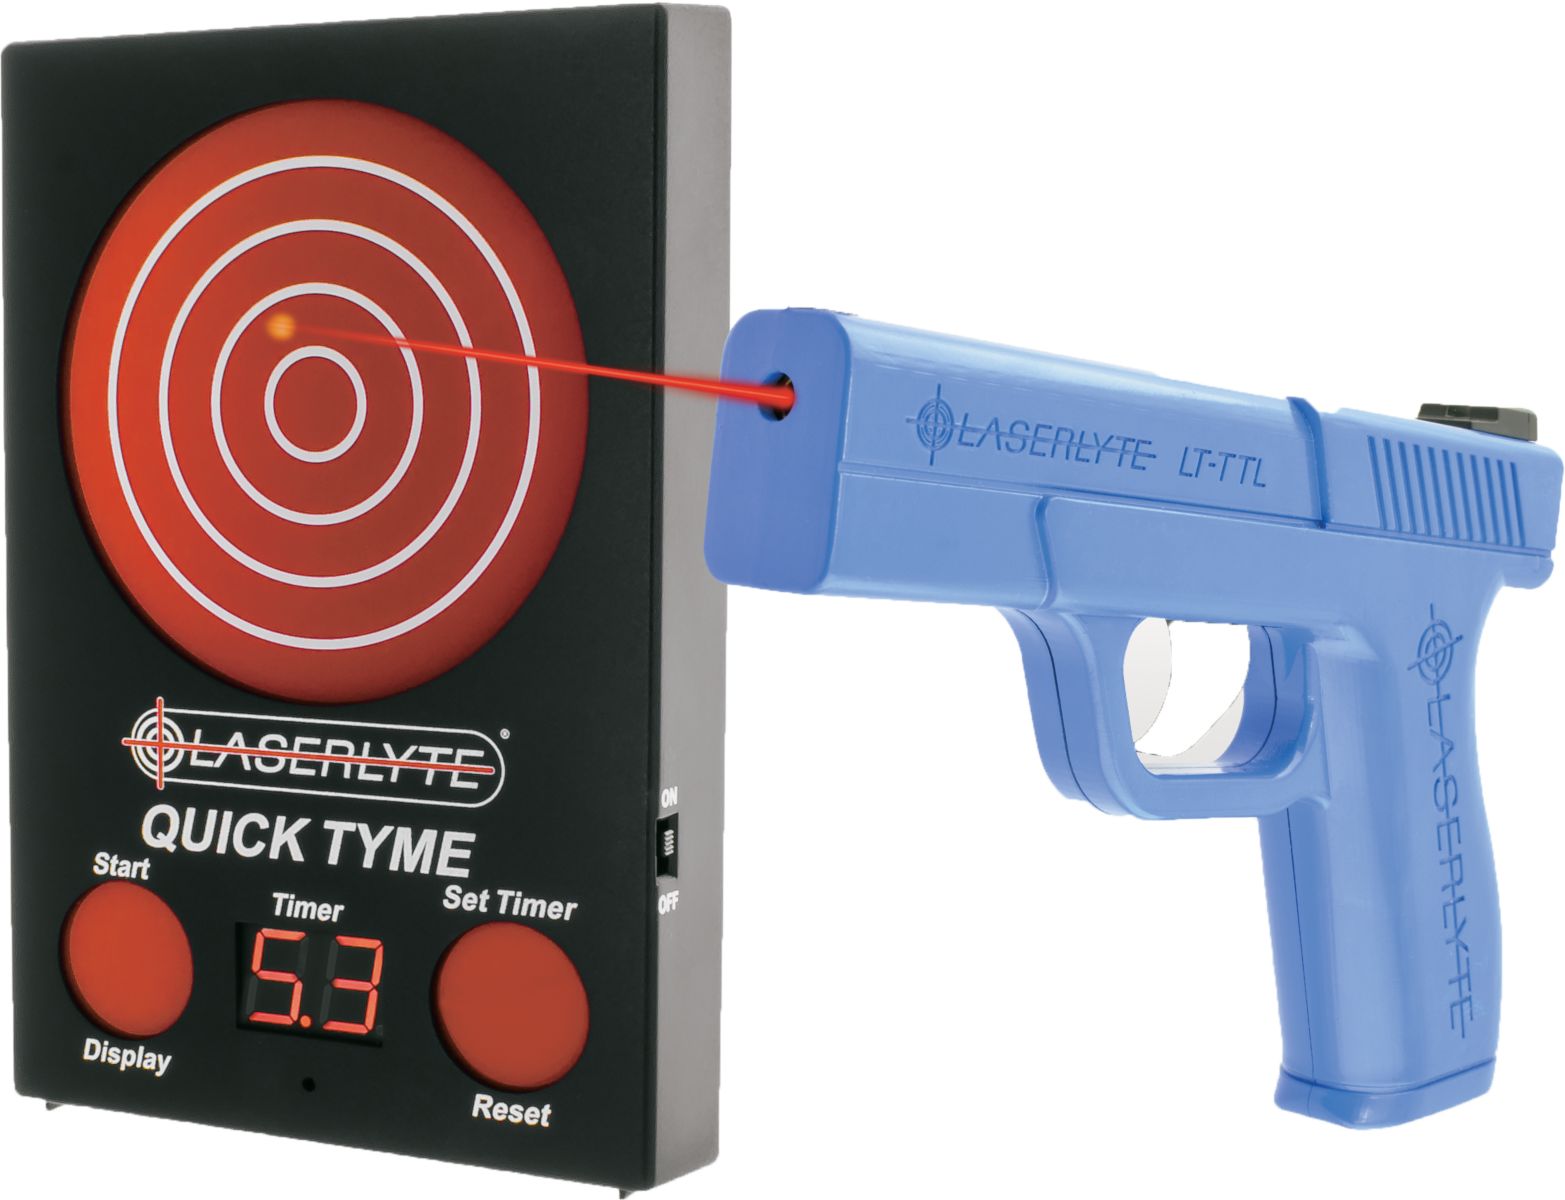 LaserLyte Quick Tyme Kit - $199.99 (Free 2-Day Shipping over $50)